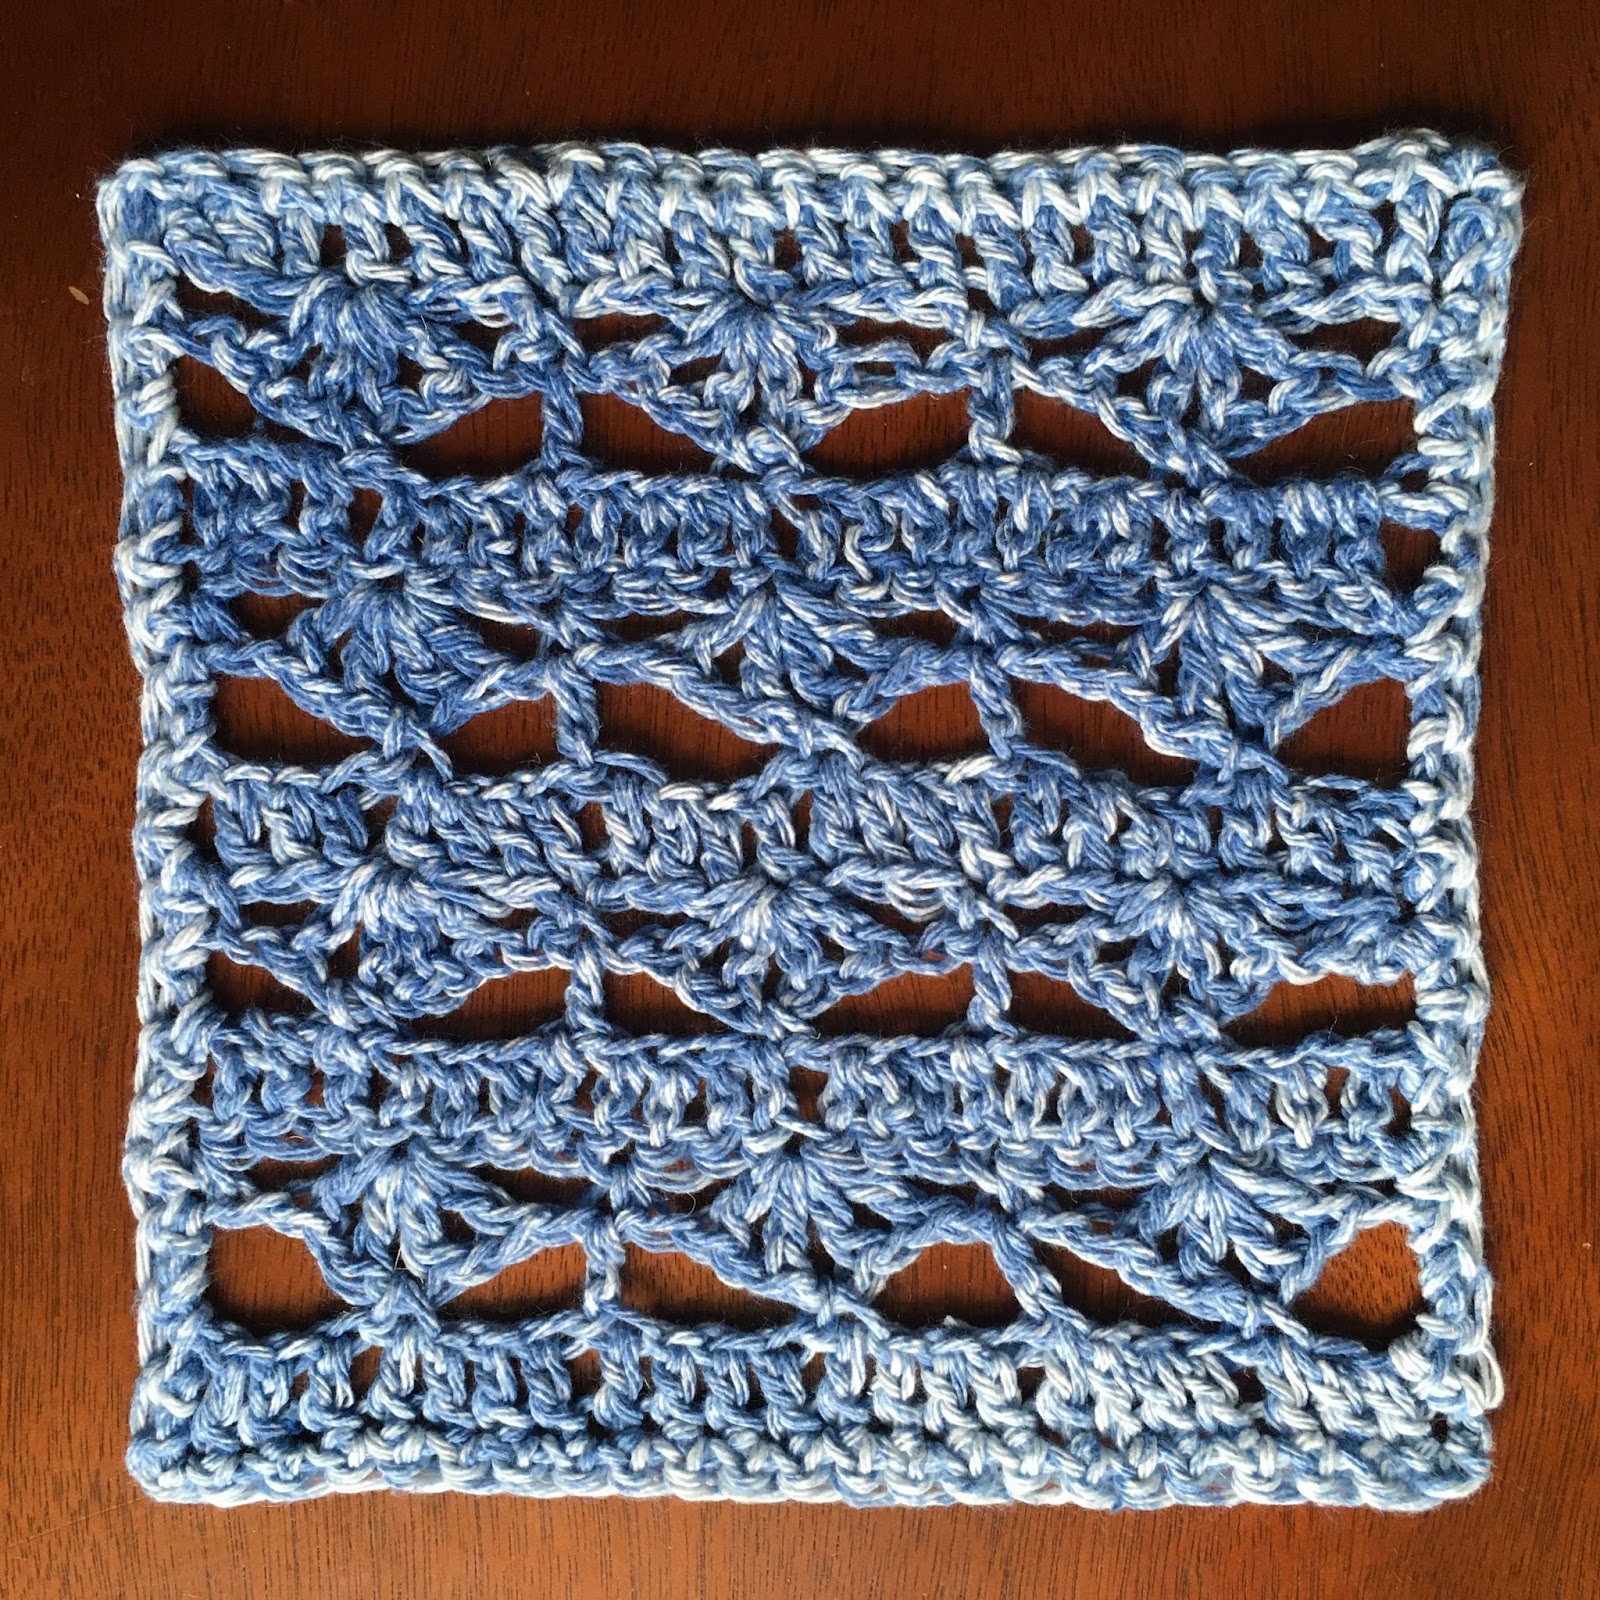 A blue and white crocheted square, featuring fan-like "windows."